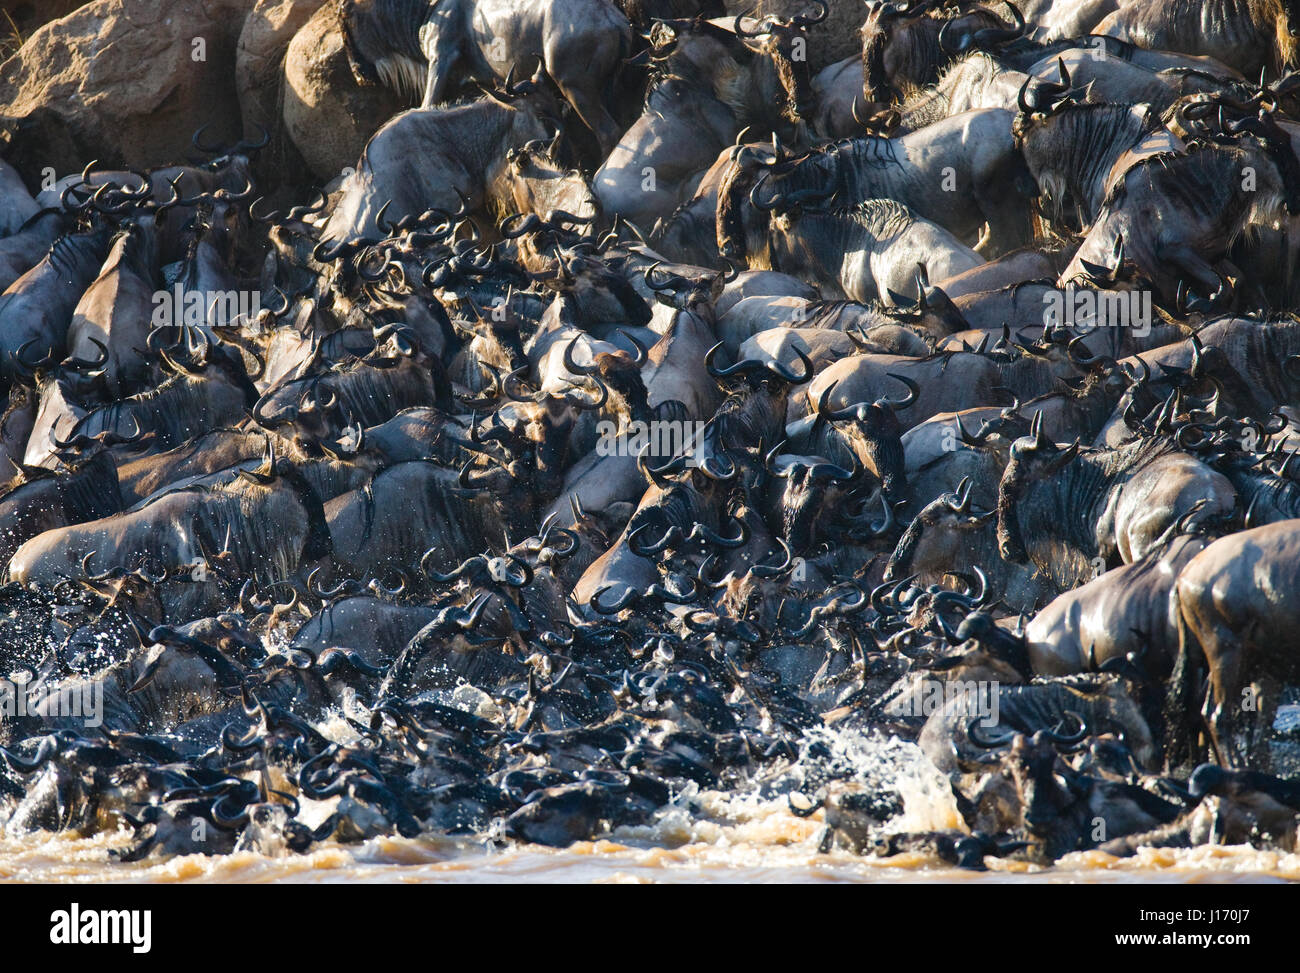 Big herd of wildebeest is about Mara River. Great Migration. Kenya. Tanzania. Masai Mara National Park. An excellent illustration. Stock Photo